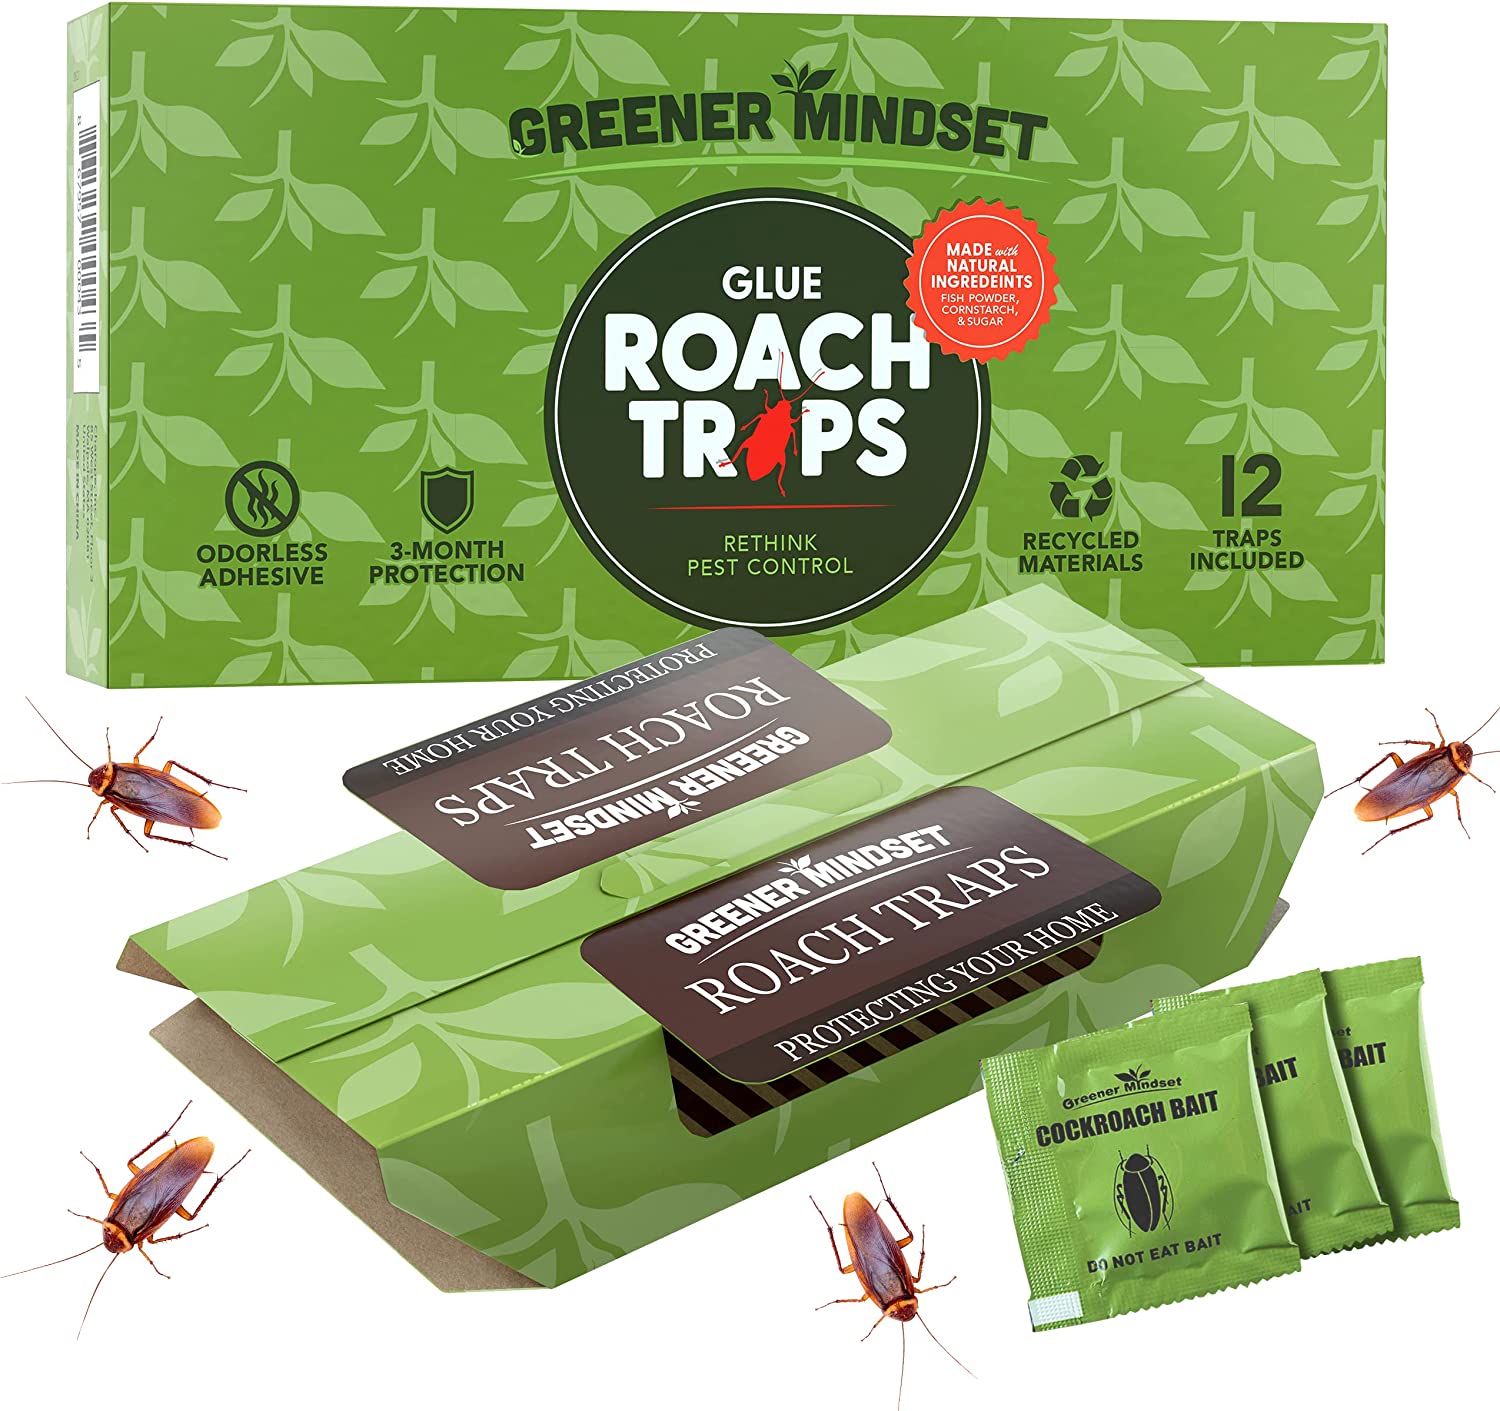 Greener Mindset Odorless Glue Traps For Cockroaches, 12-Pack